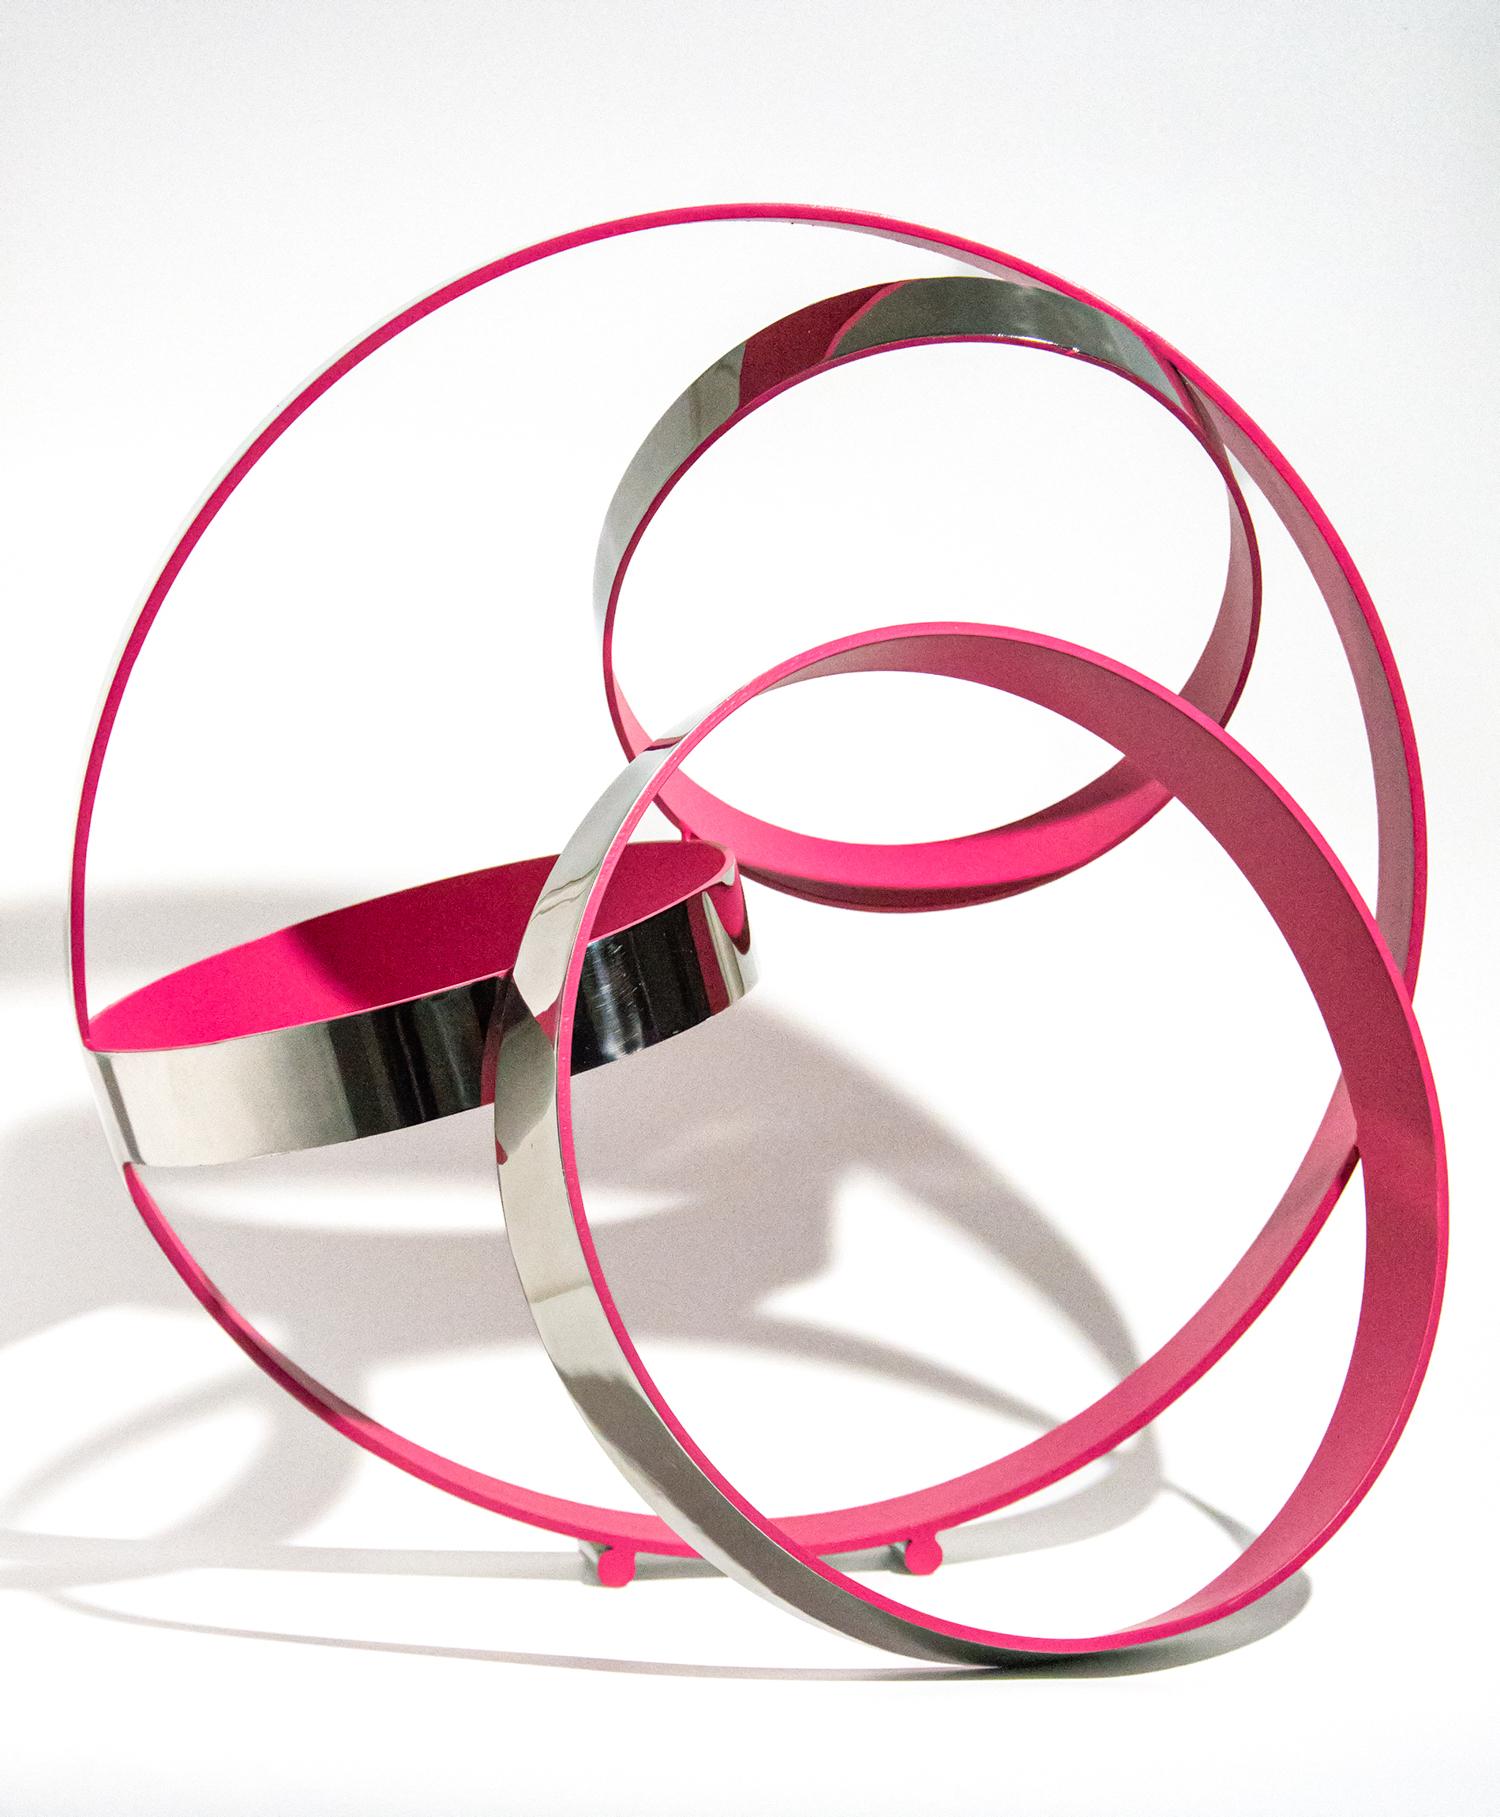 Four Ring Temps Zero Pink - geometric abstract, stainless steel sculpture - Sculpture by Philippe Pallafray